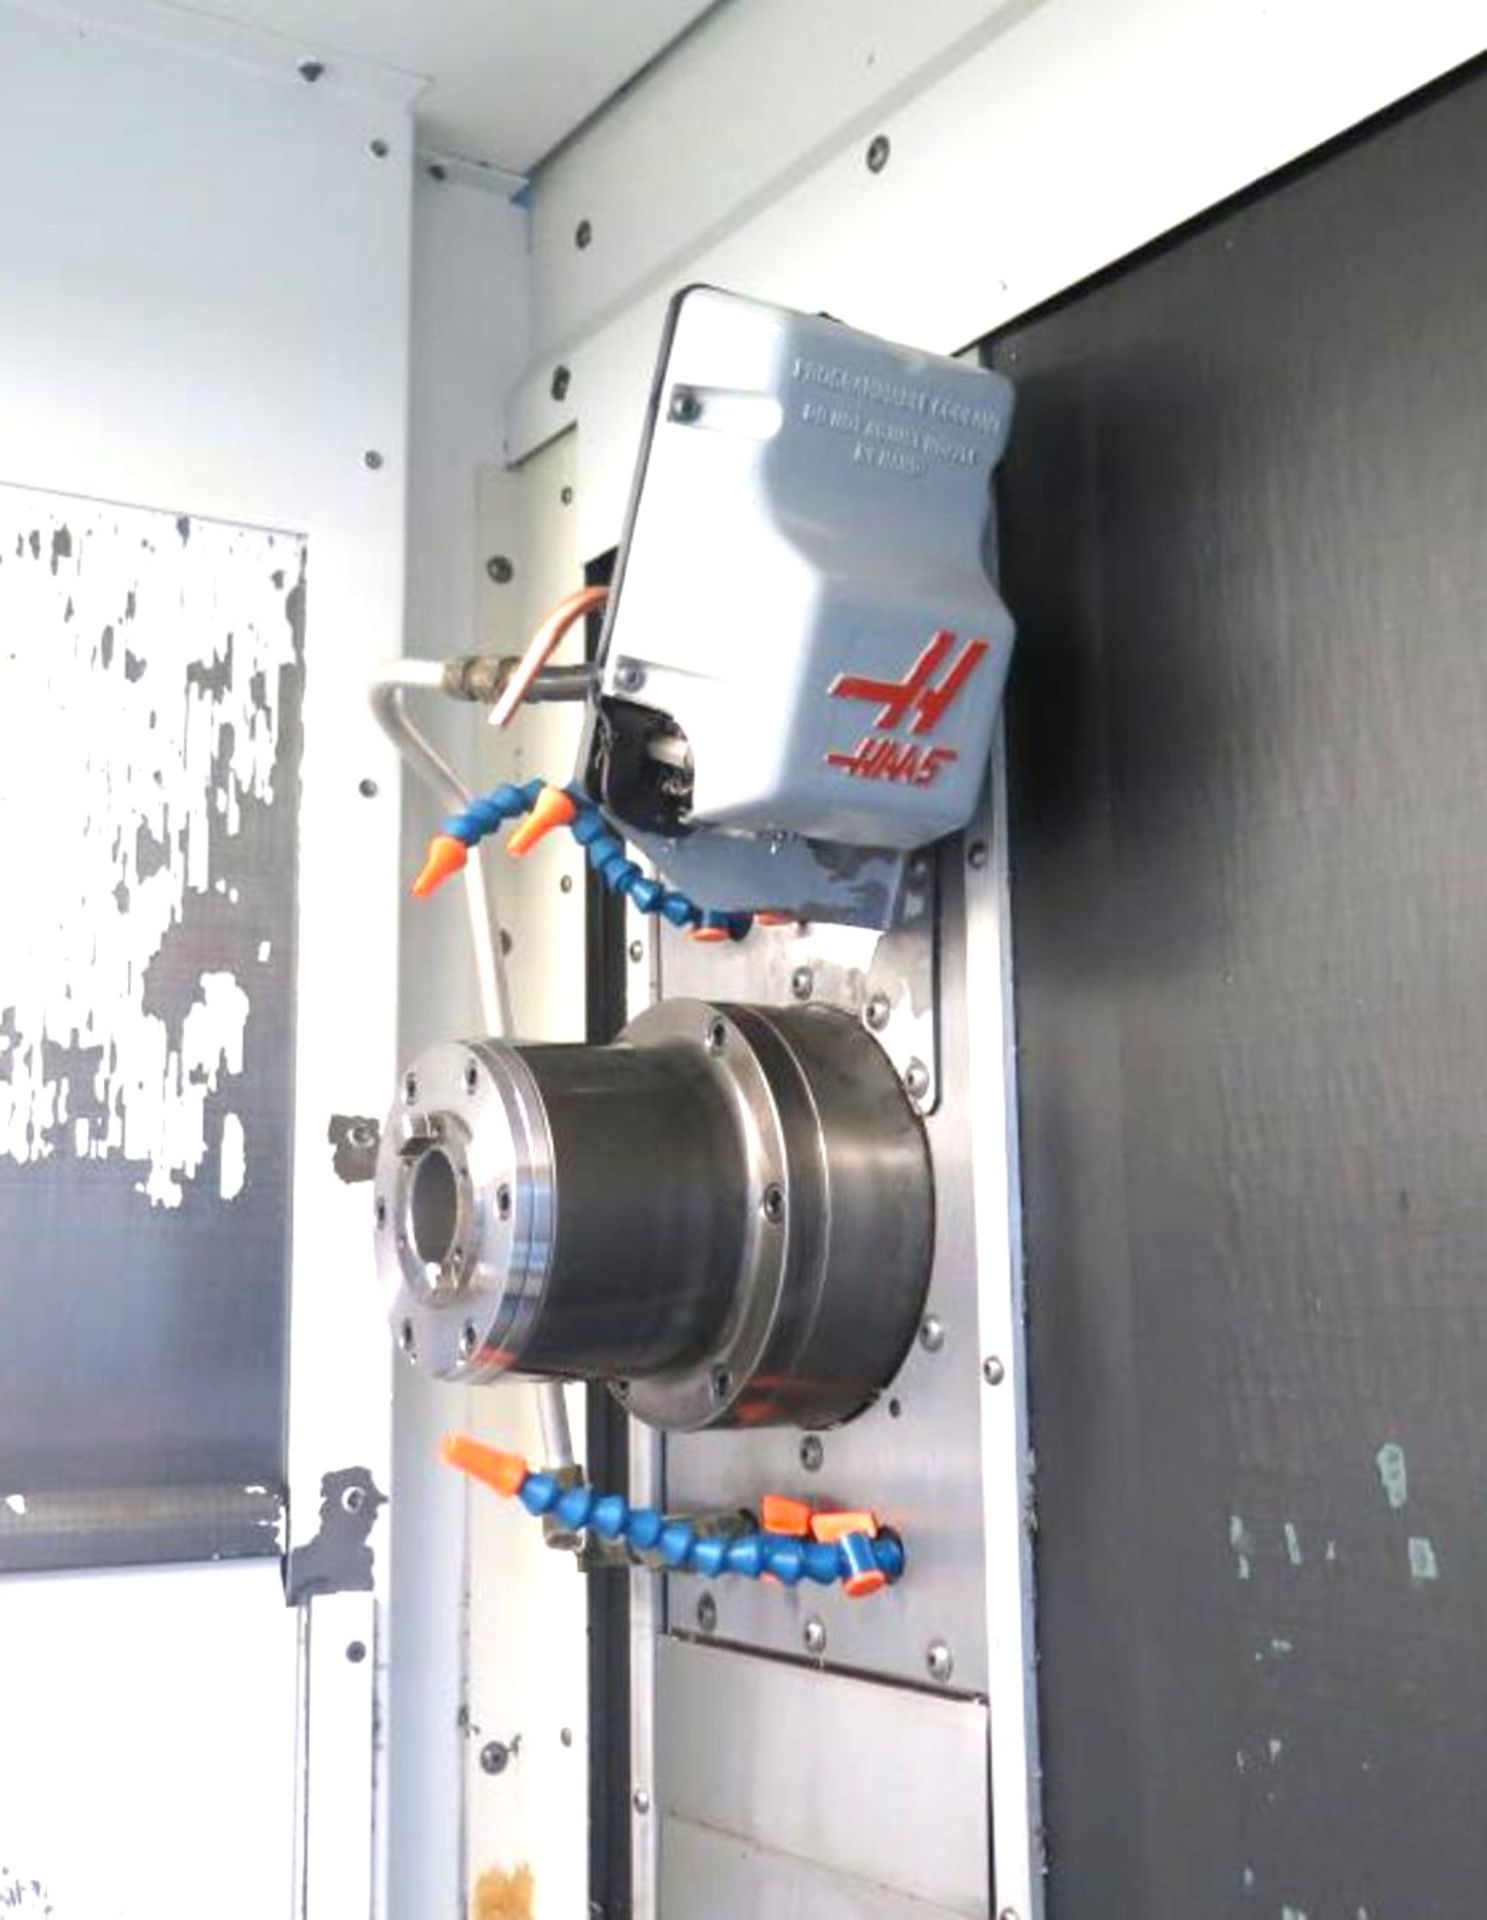 HAAS EC-400 4-AXIS PRECISION HORIZONTAL MACHINING CENTER W/16" PALLETS - Image 4 of 14